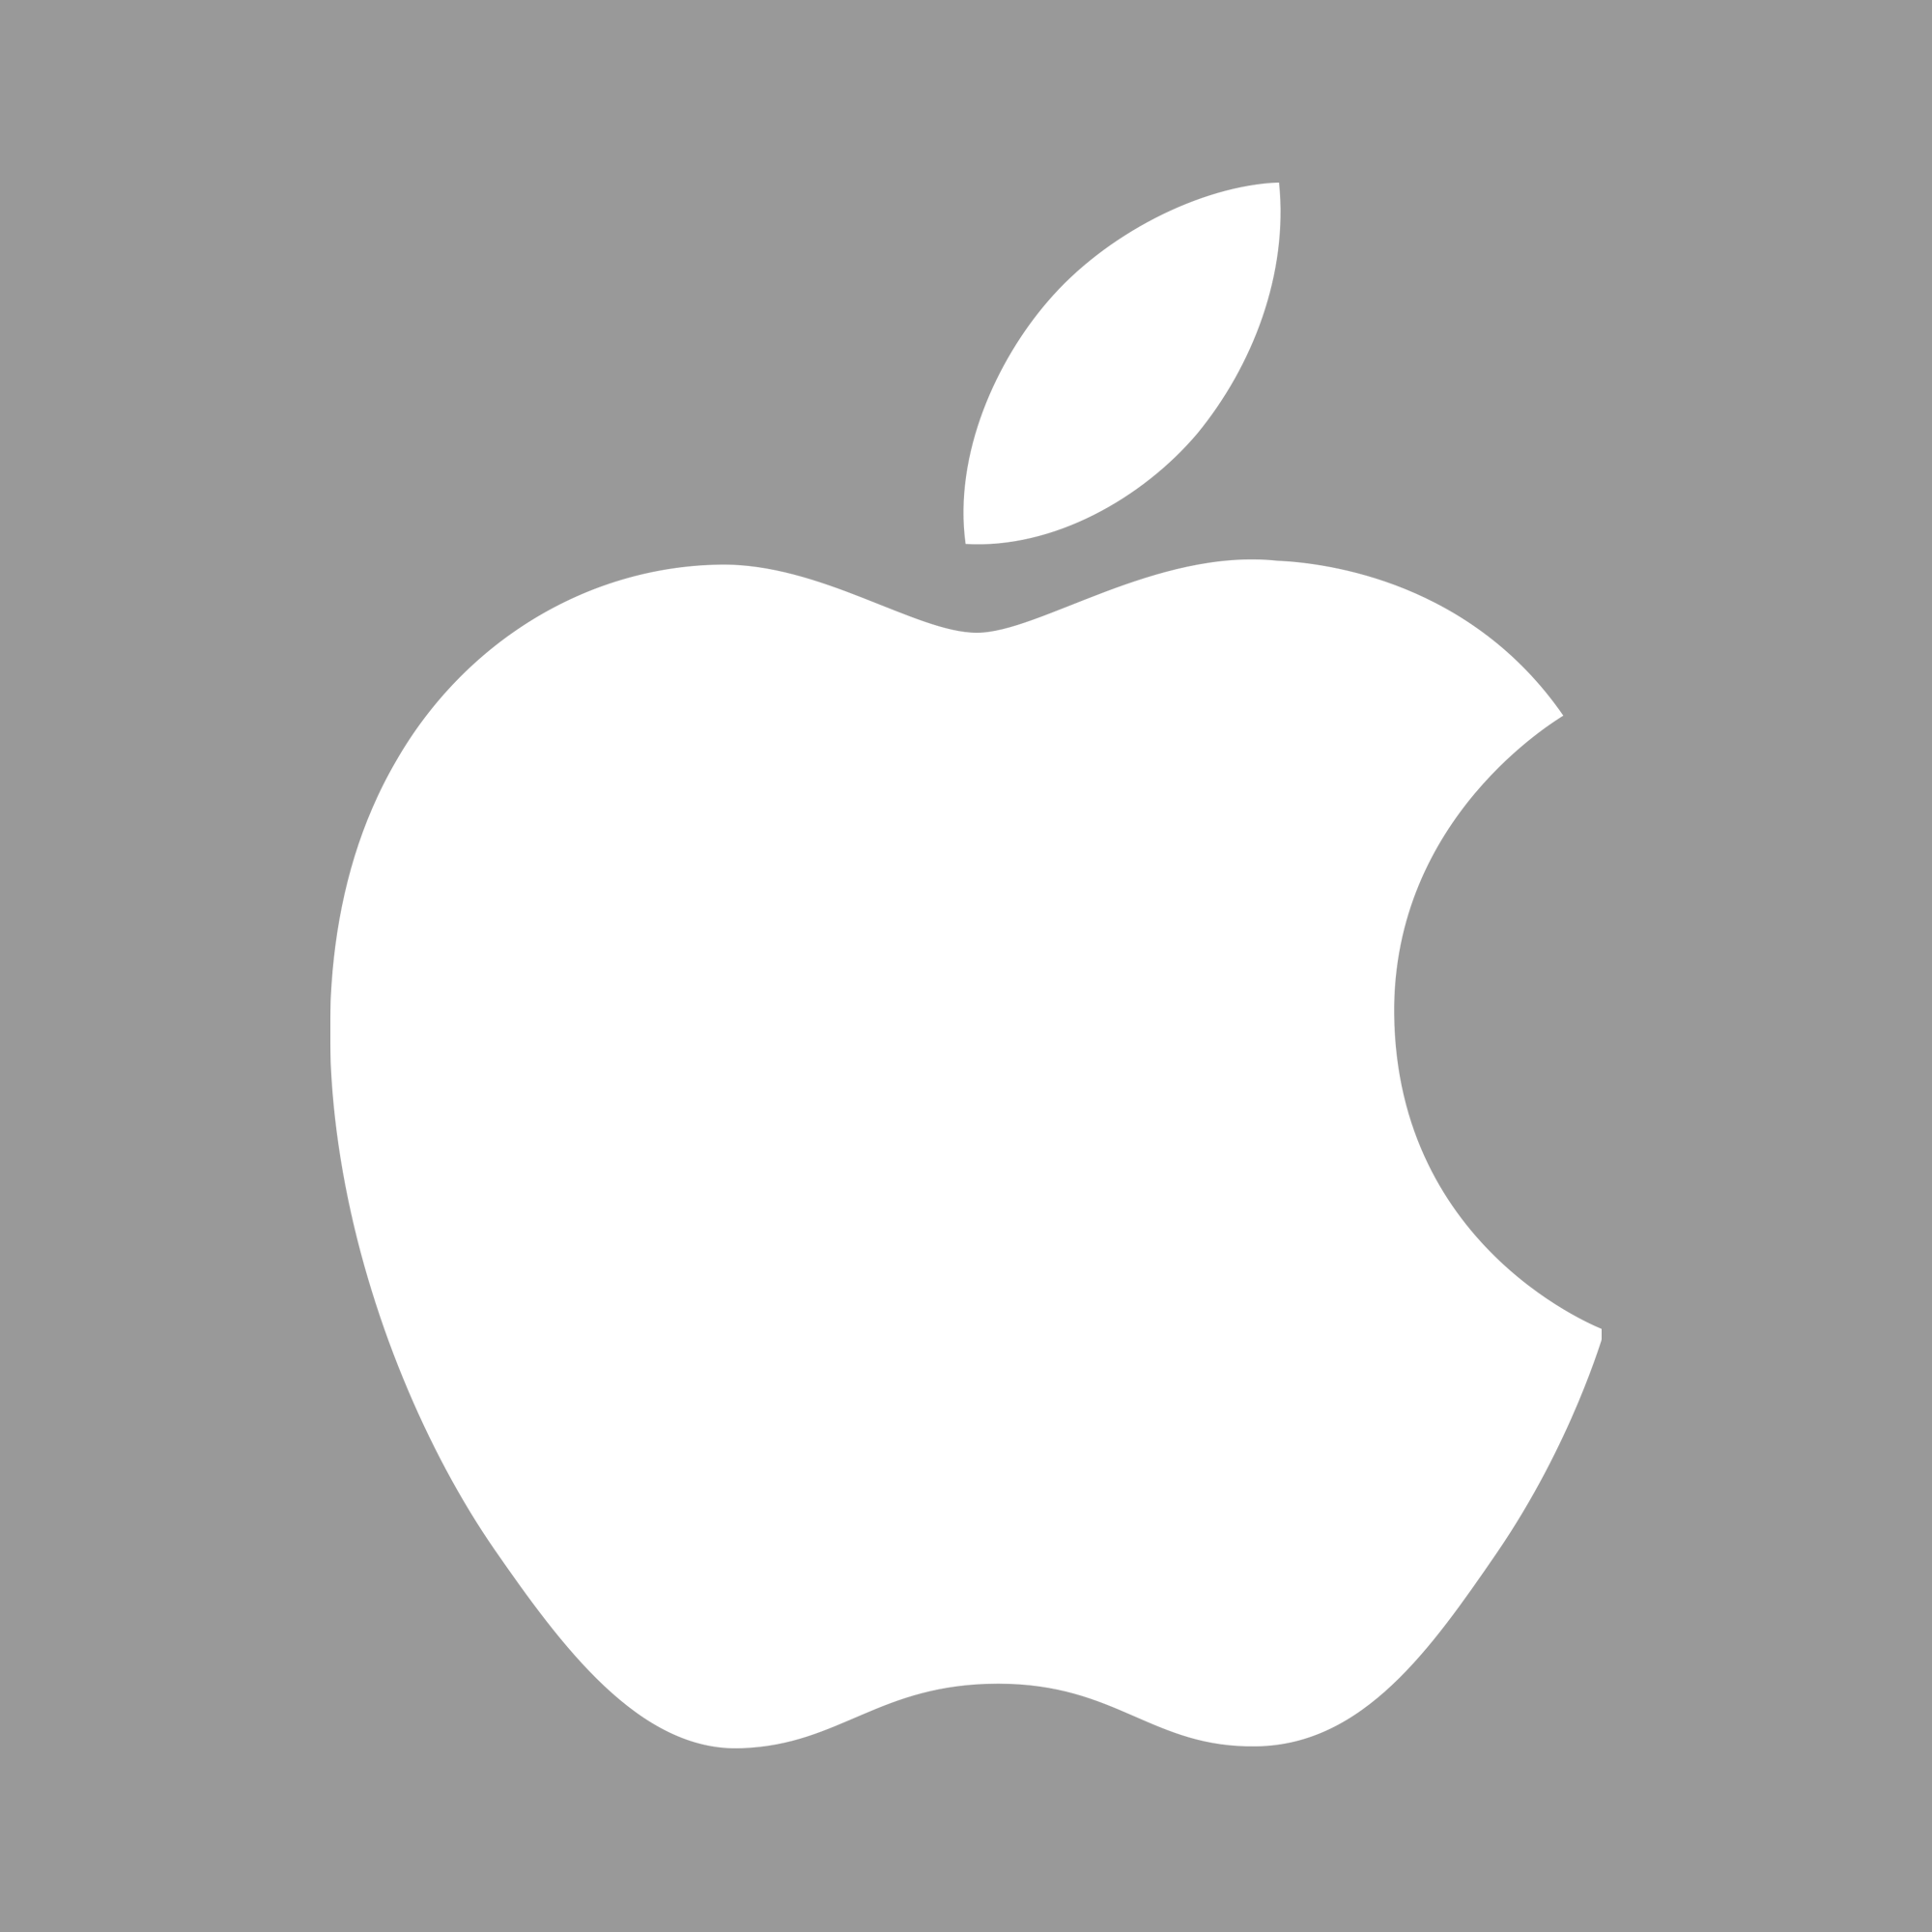 Apple's Logo - The True Meaning of Apple's Logo: A Lesson in Simplicity